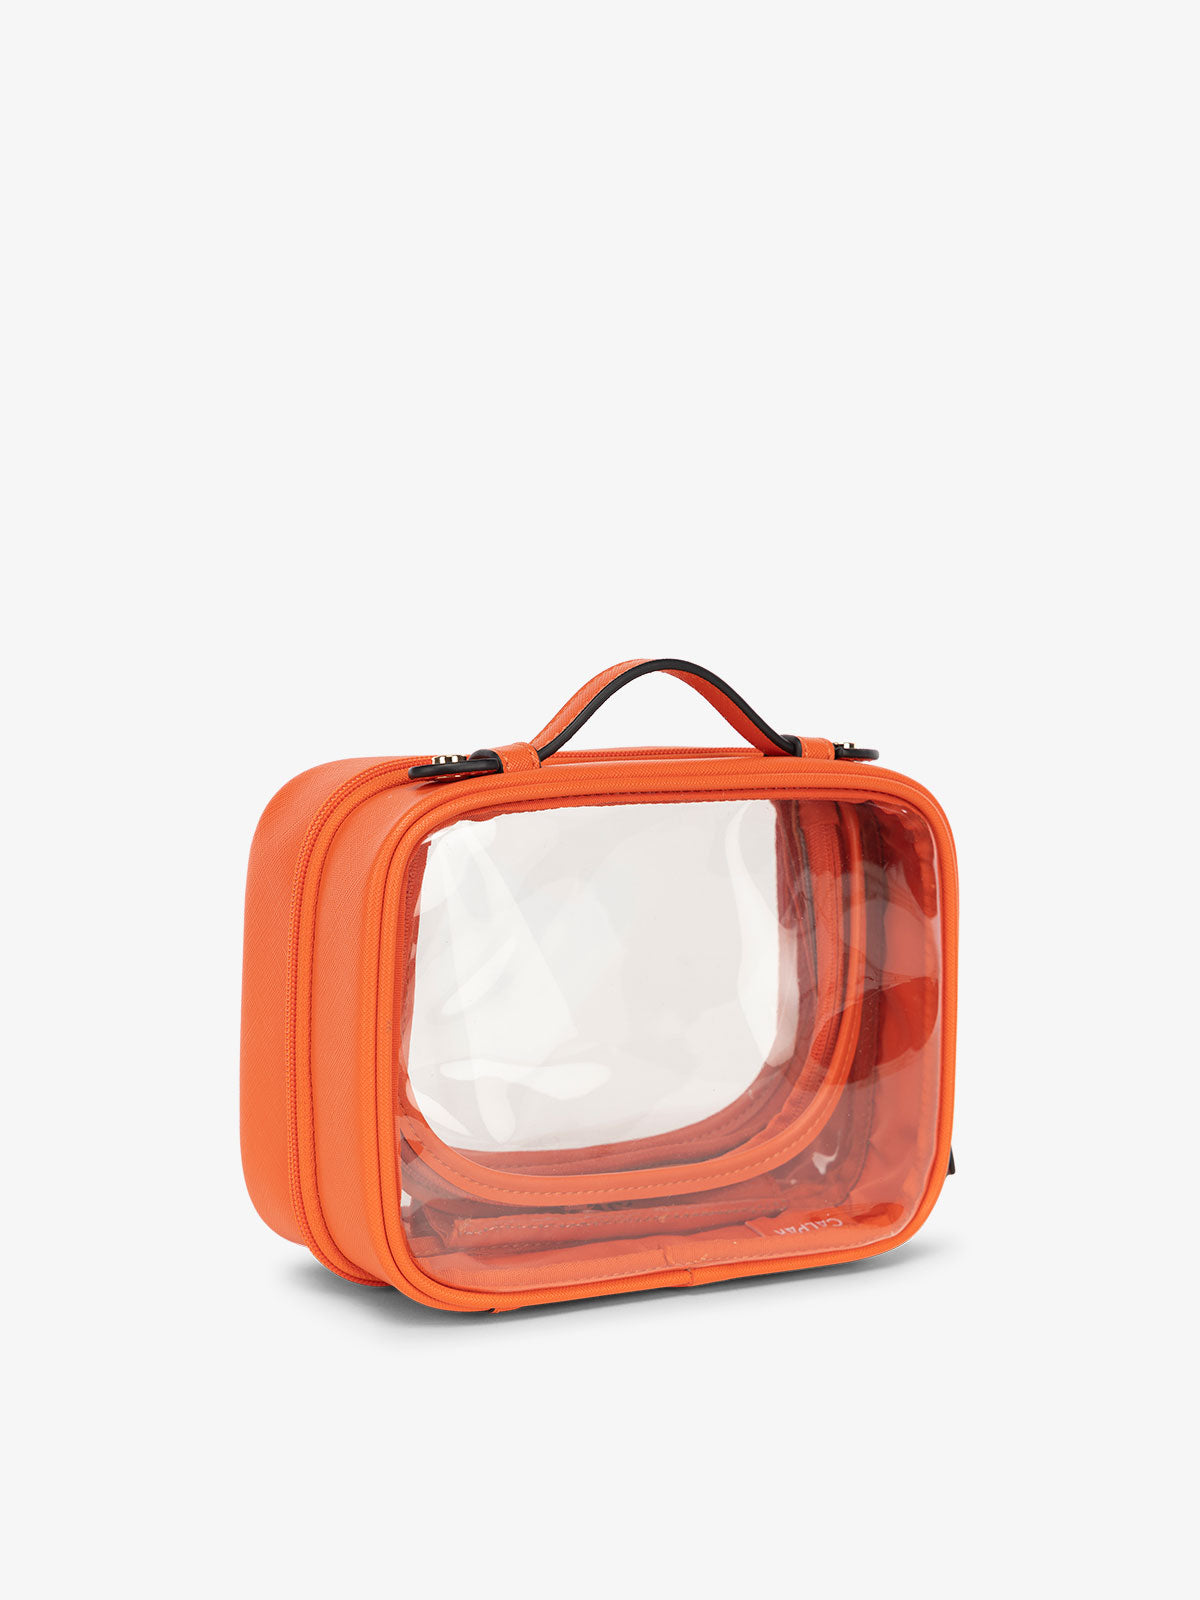 CALPAK small water resistant clear cosmetics case with sturdy handles in papaya orange